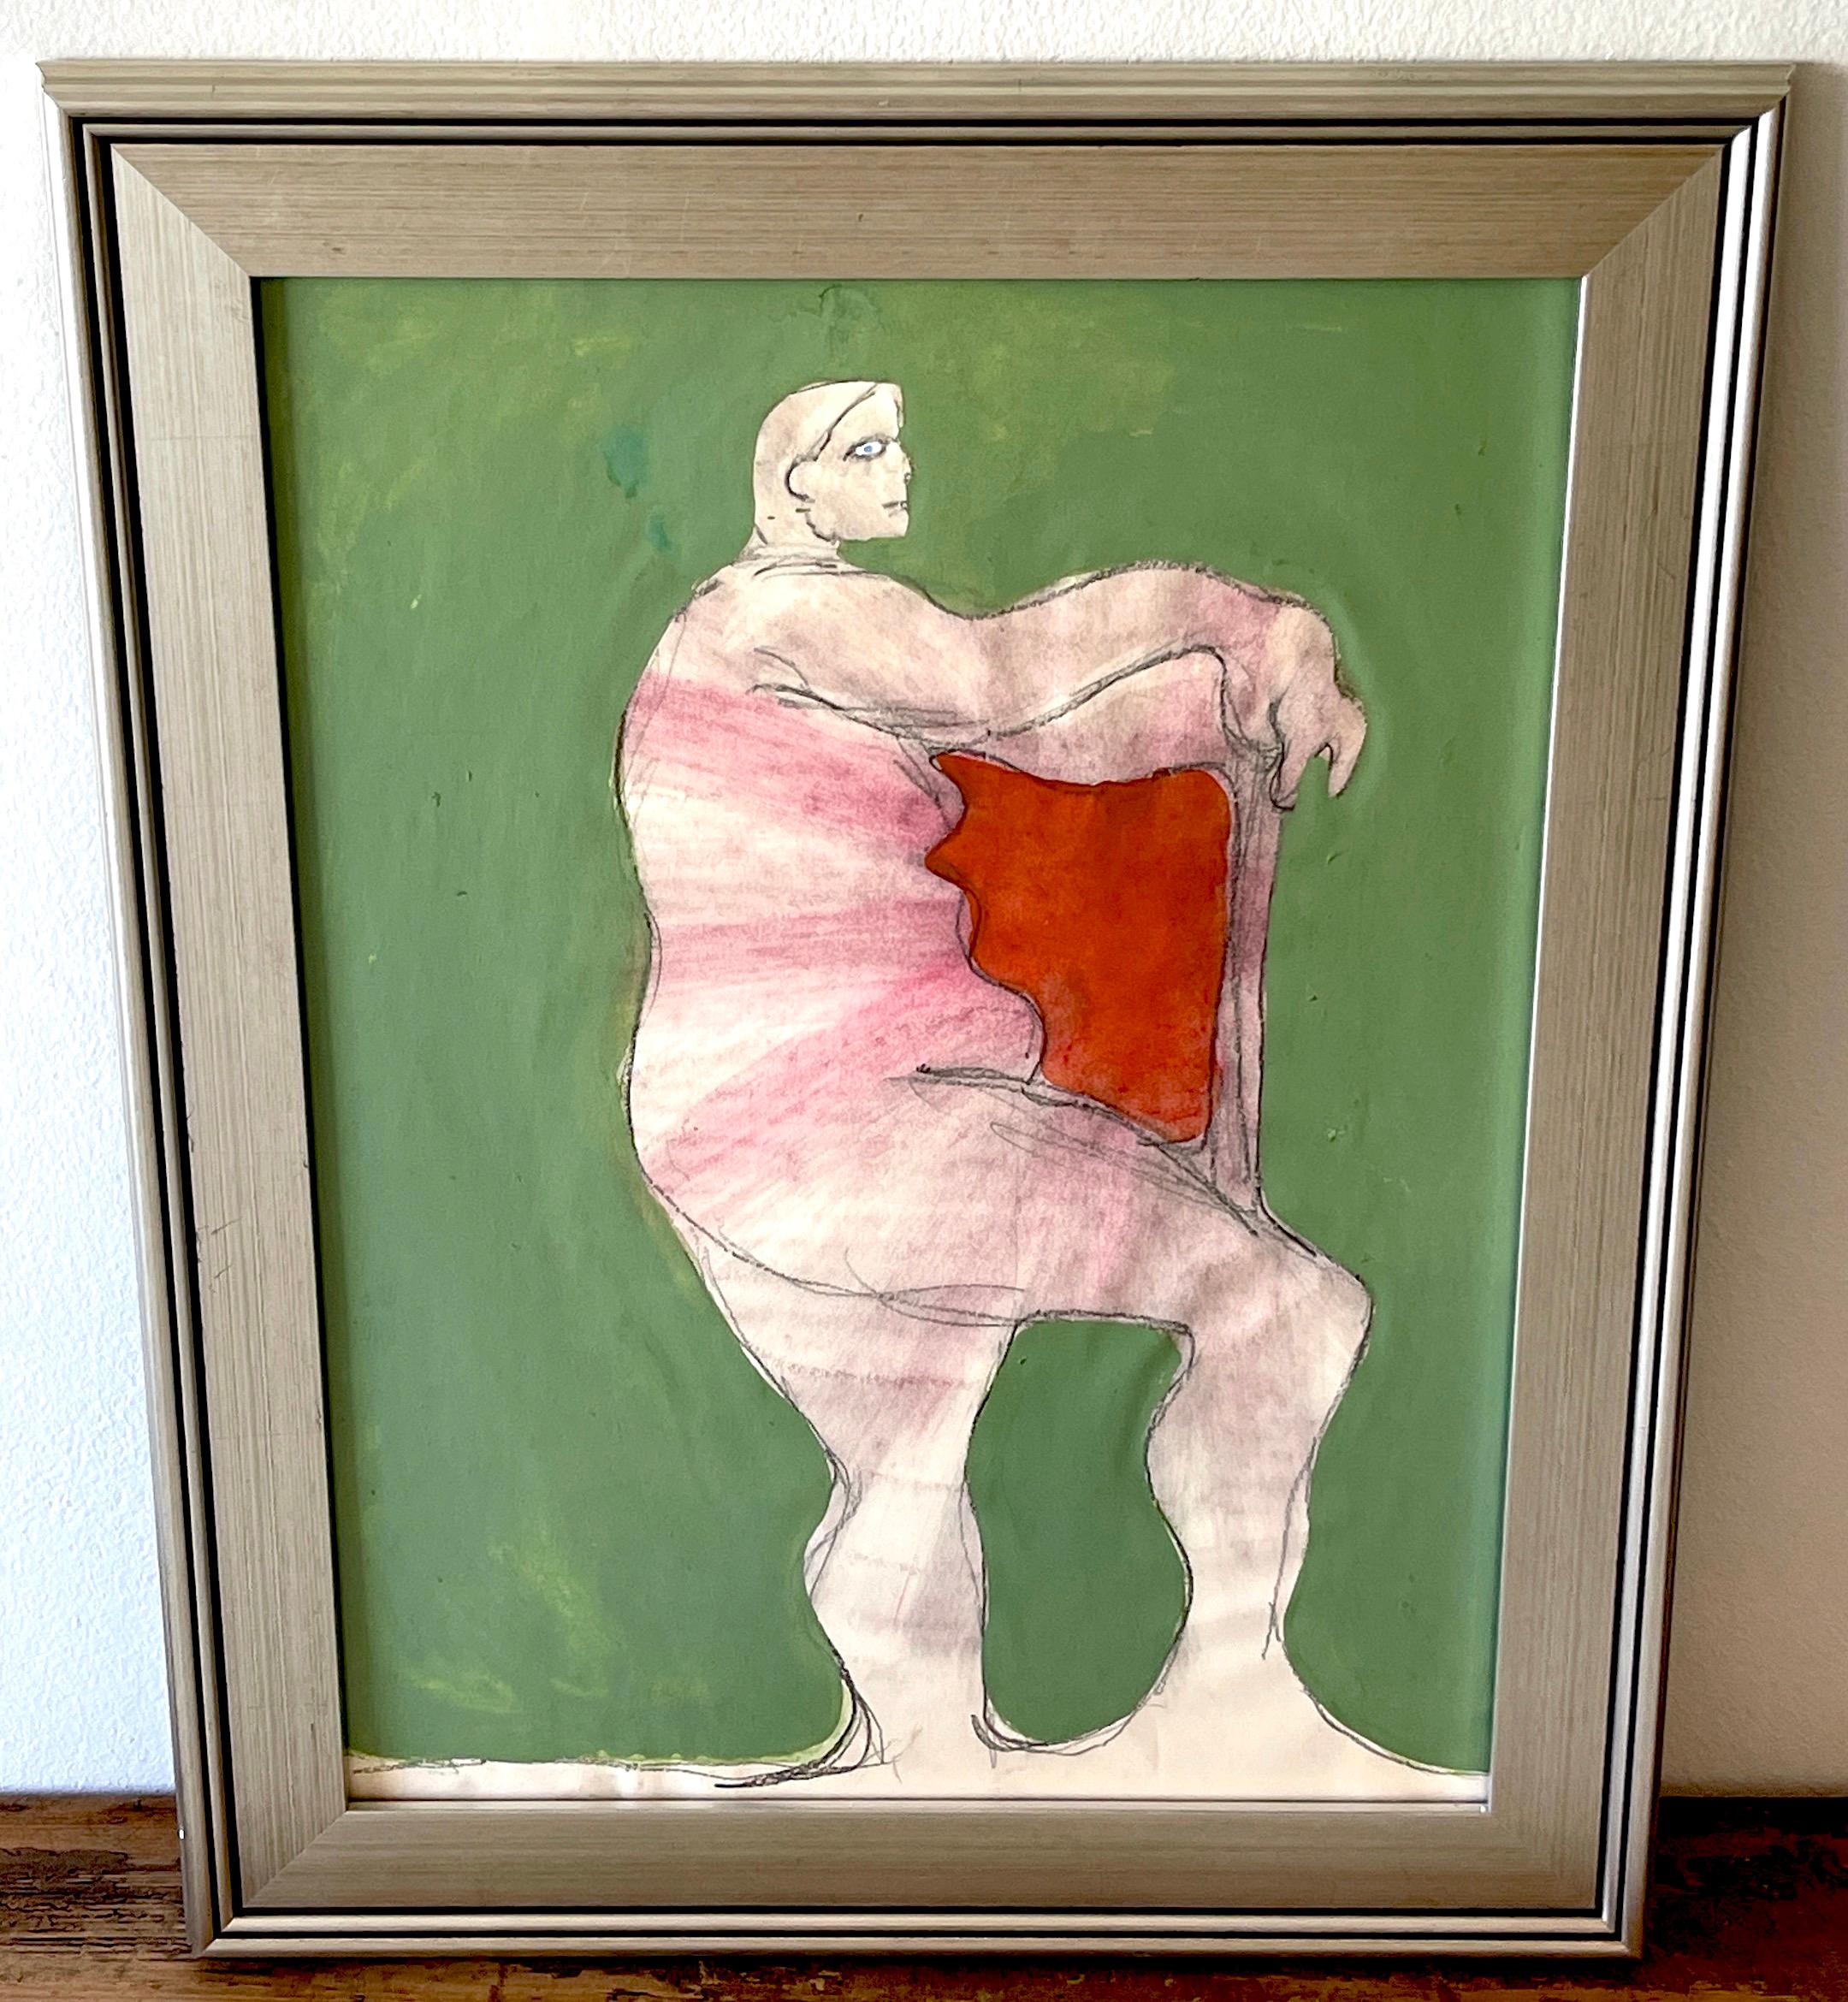 'Standing Figure' Oil/Mixed Media on Paper, 1960s by Douglas D. Peden 
USA, 1933-2015, Listed Modern Painter, Mathematician & Scholar
Oil/Mixed Media on Paper 
Signed in Pencil on Back 'Douglas Peden' 
This work measures 18-Inches x 24-Inches